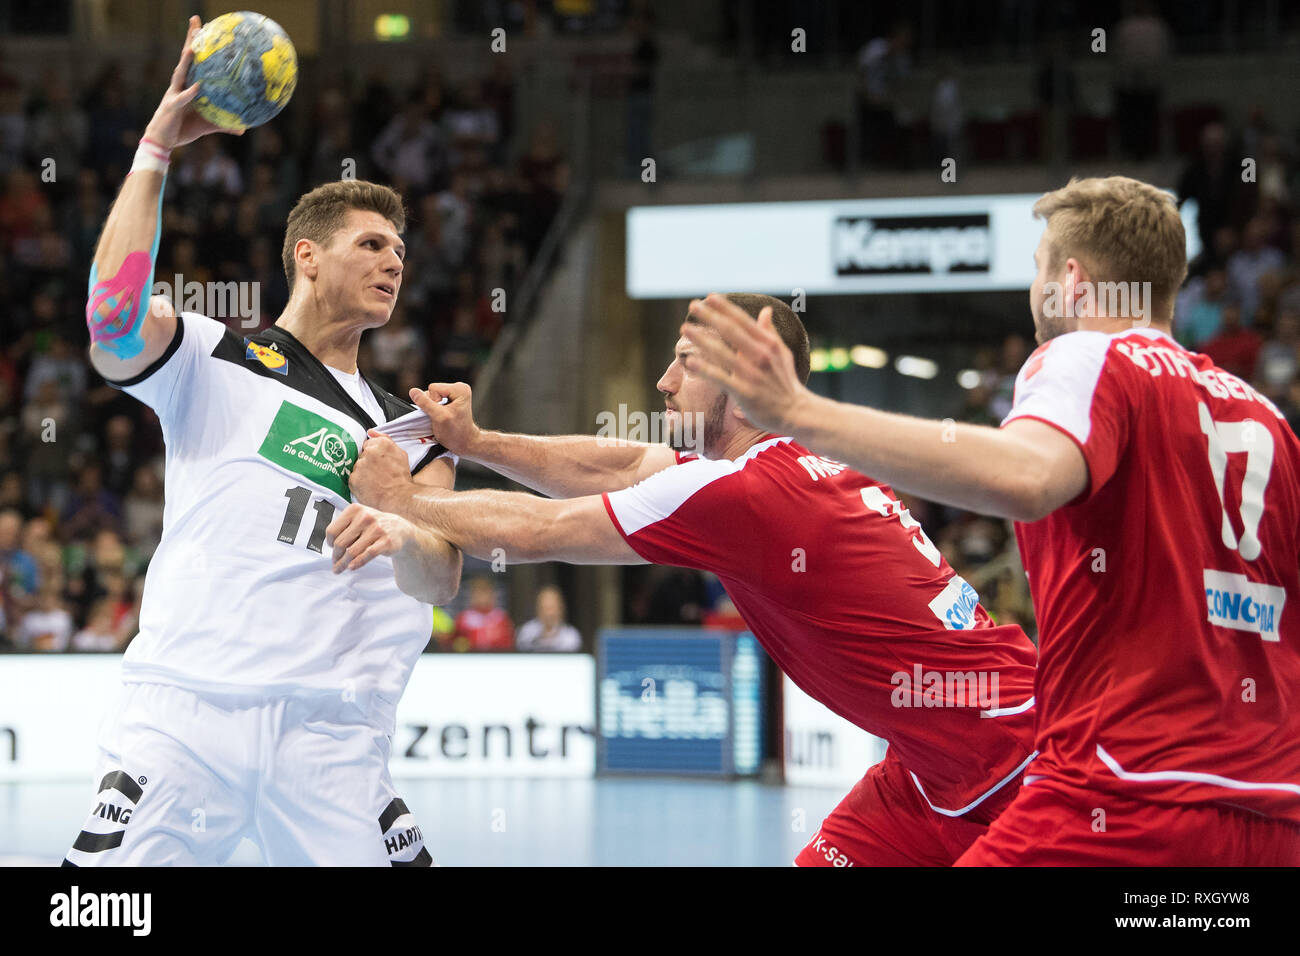 Dusseldorf, Germany. 9th March 2019. Handball: International match, Germany - Switzerland in the ISS Dome. Germany's Sebastian Heymann and Switzerland's Lucas Meister fight for the ball. Photo: Federico Gambarini/dpa Credit: dpa picture alliance/Alamy Live News Stock Photo